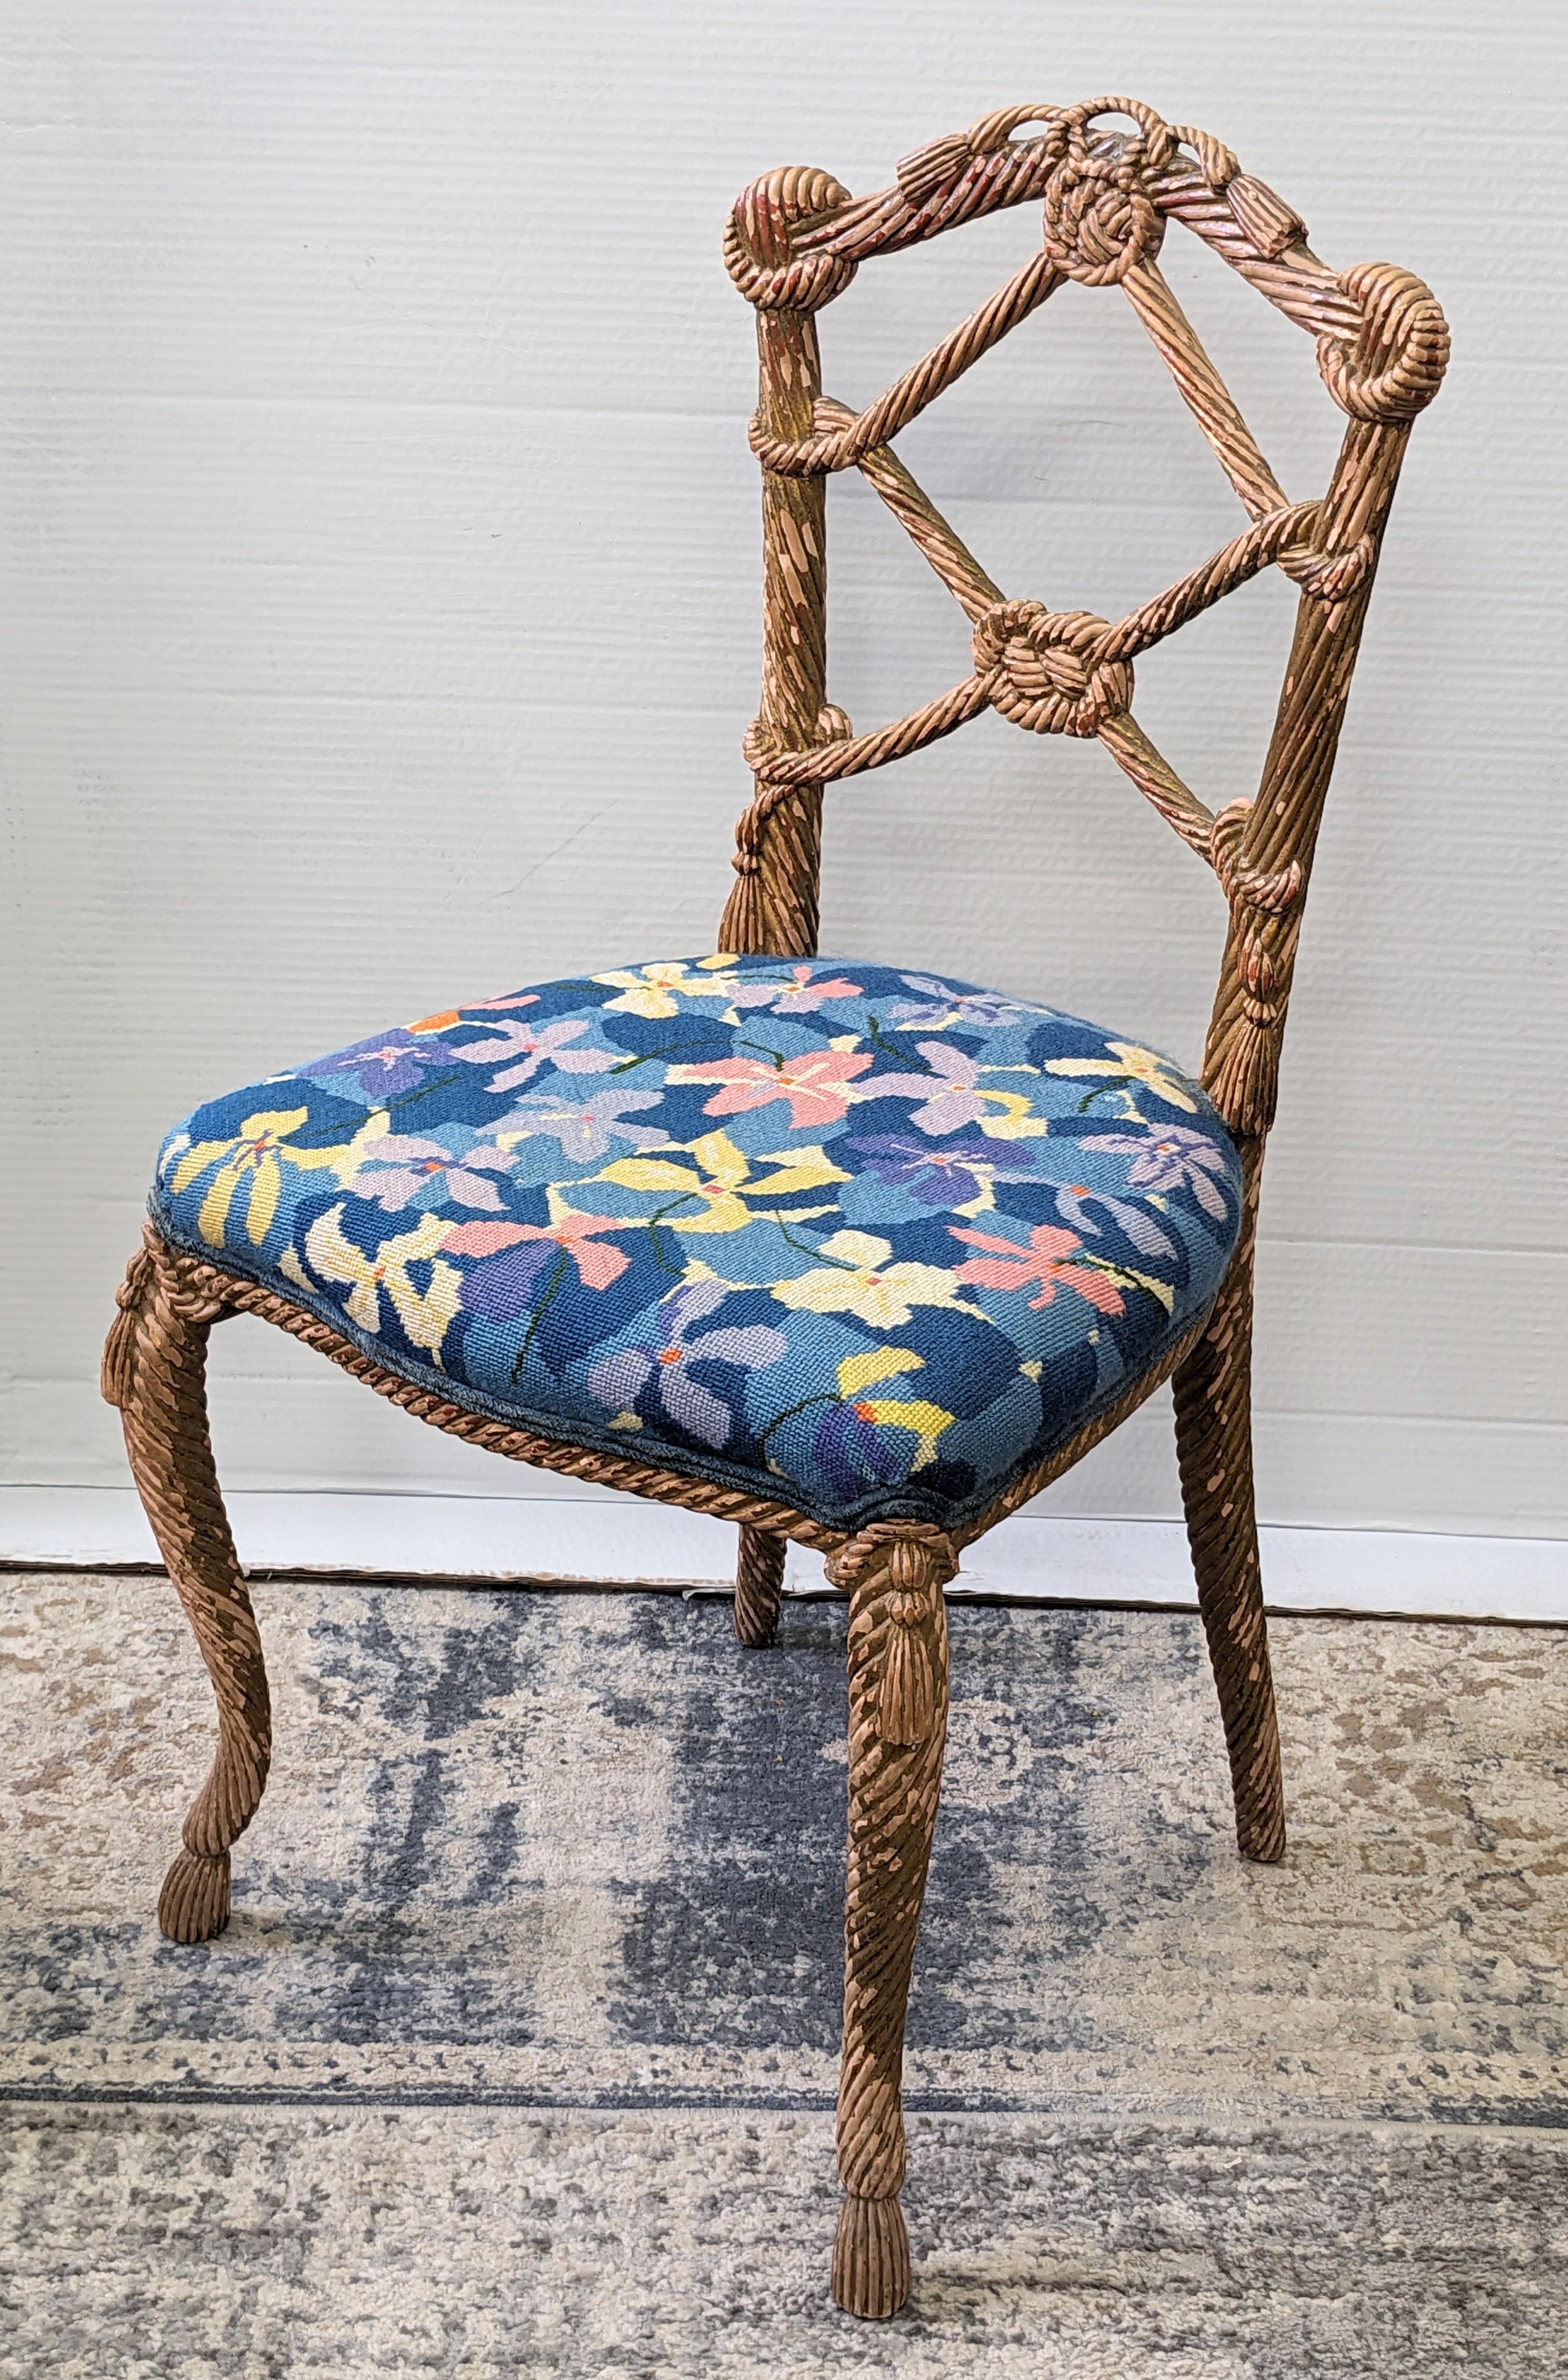 Amazing Carved Wood Gilt Tassel Rope Motif Chair from a Dorothy Draper designed estate from Westchester County, NY. Antique gilt accent chair reimagined in the period with a vibrant floral needlepoint seat. Seat 17